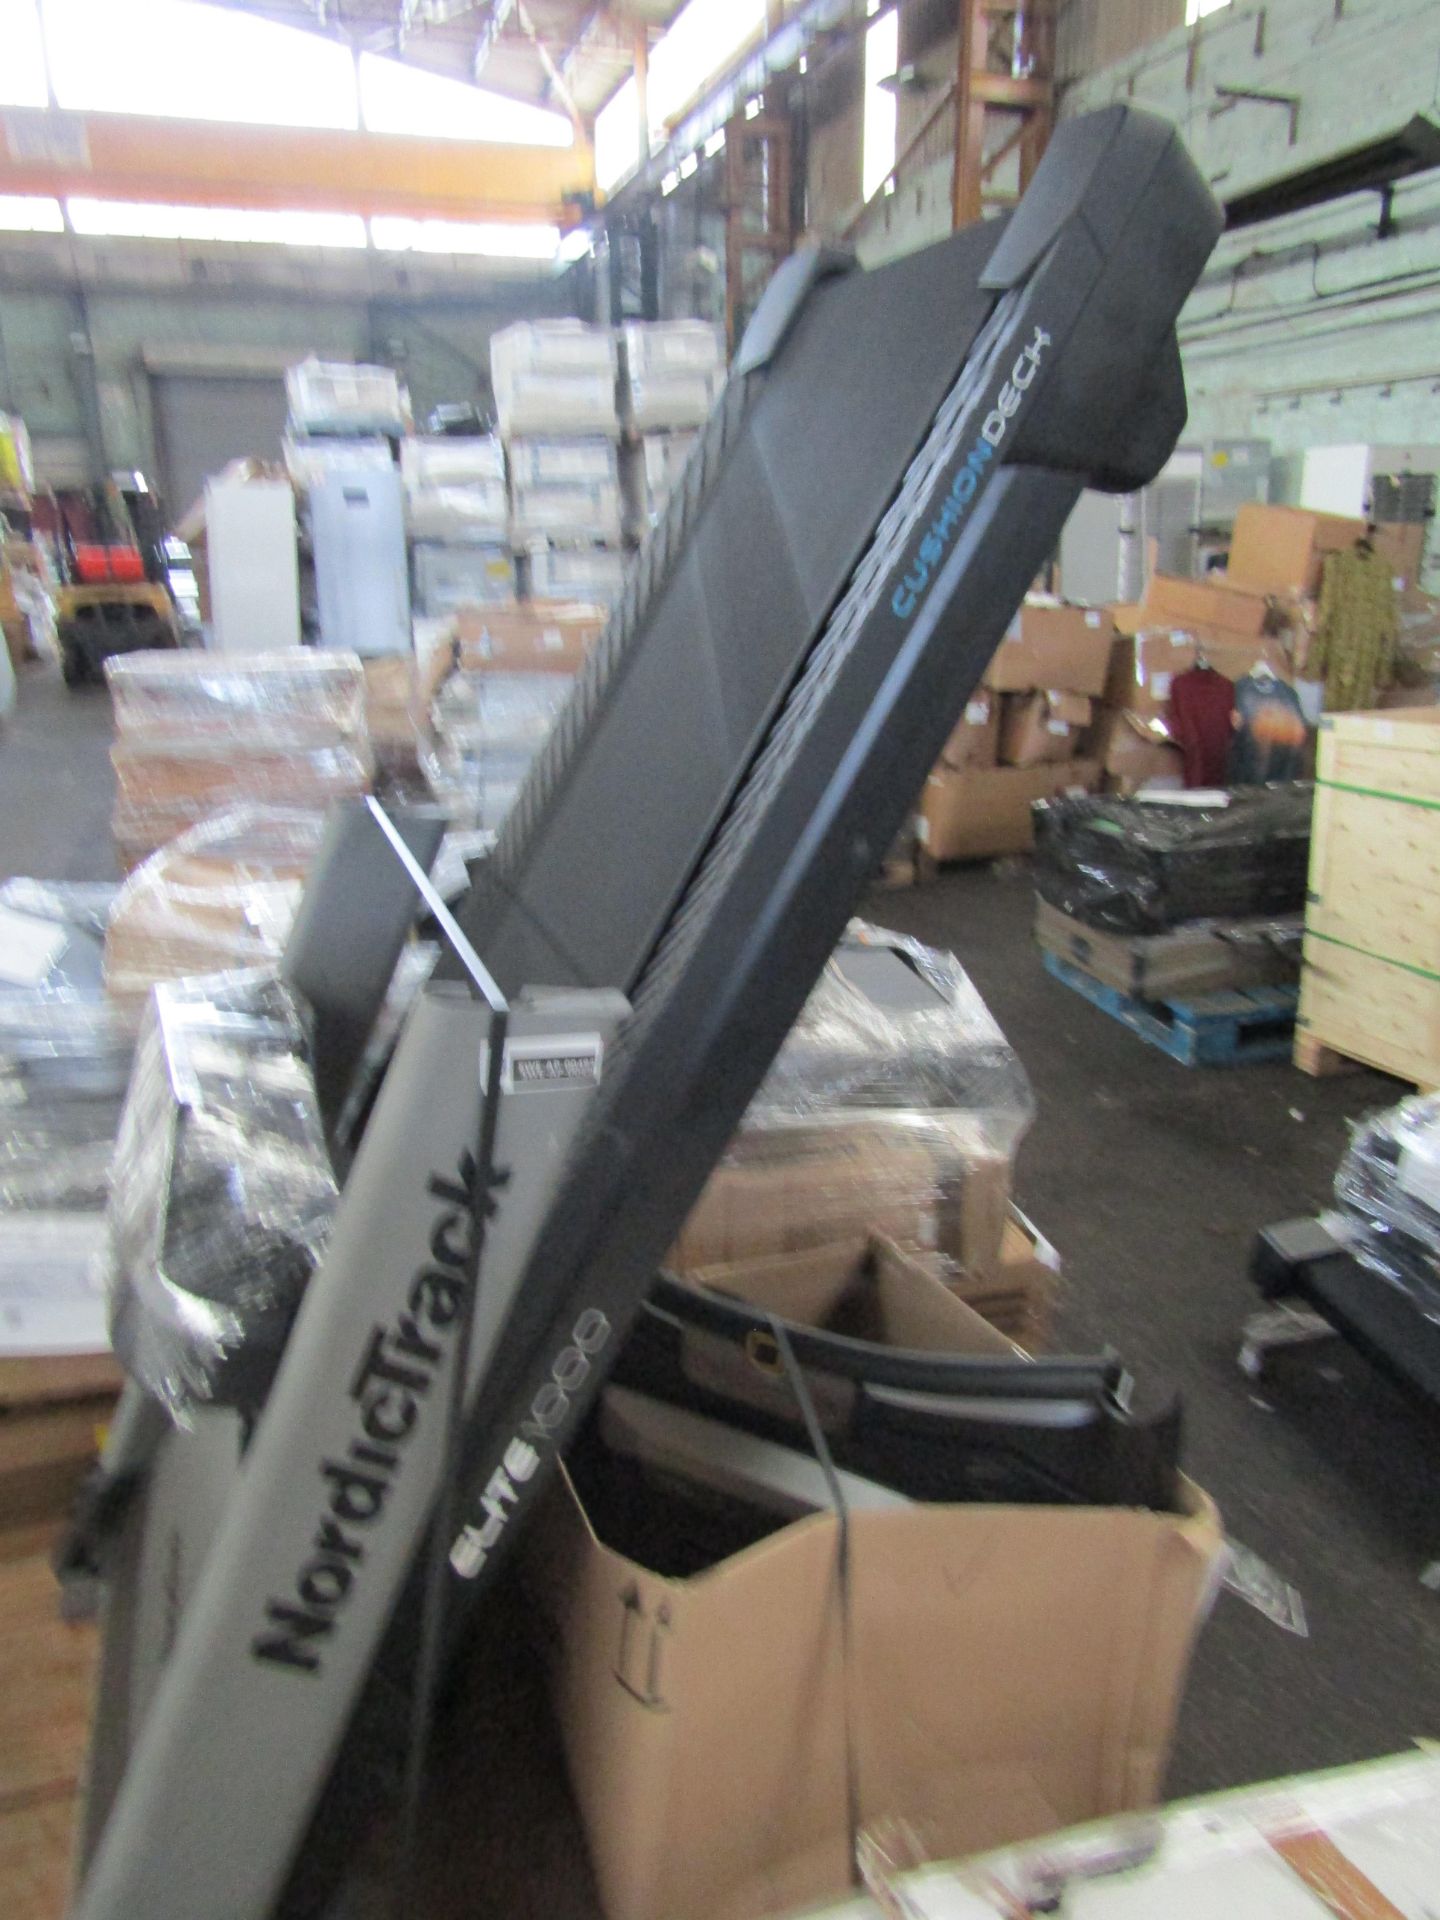 Sweatband NordicTrack Elite 1000 Folding Treadmill RRP 1699.00About the Product(s)NordicTrack - Image 2 of 2